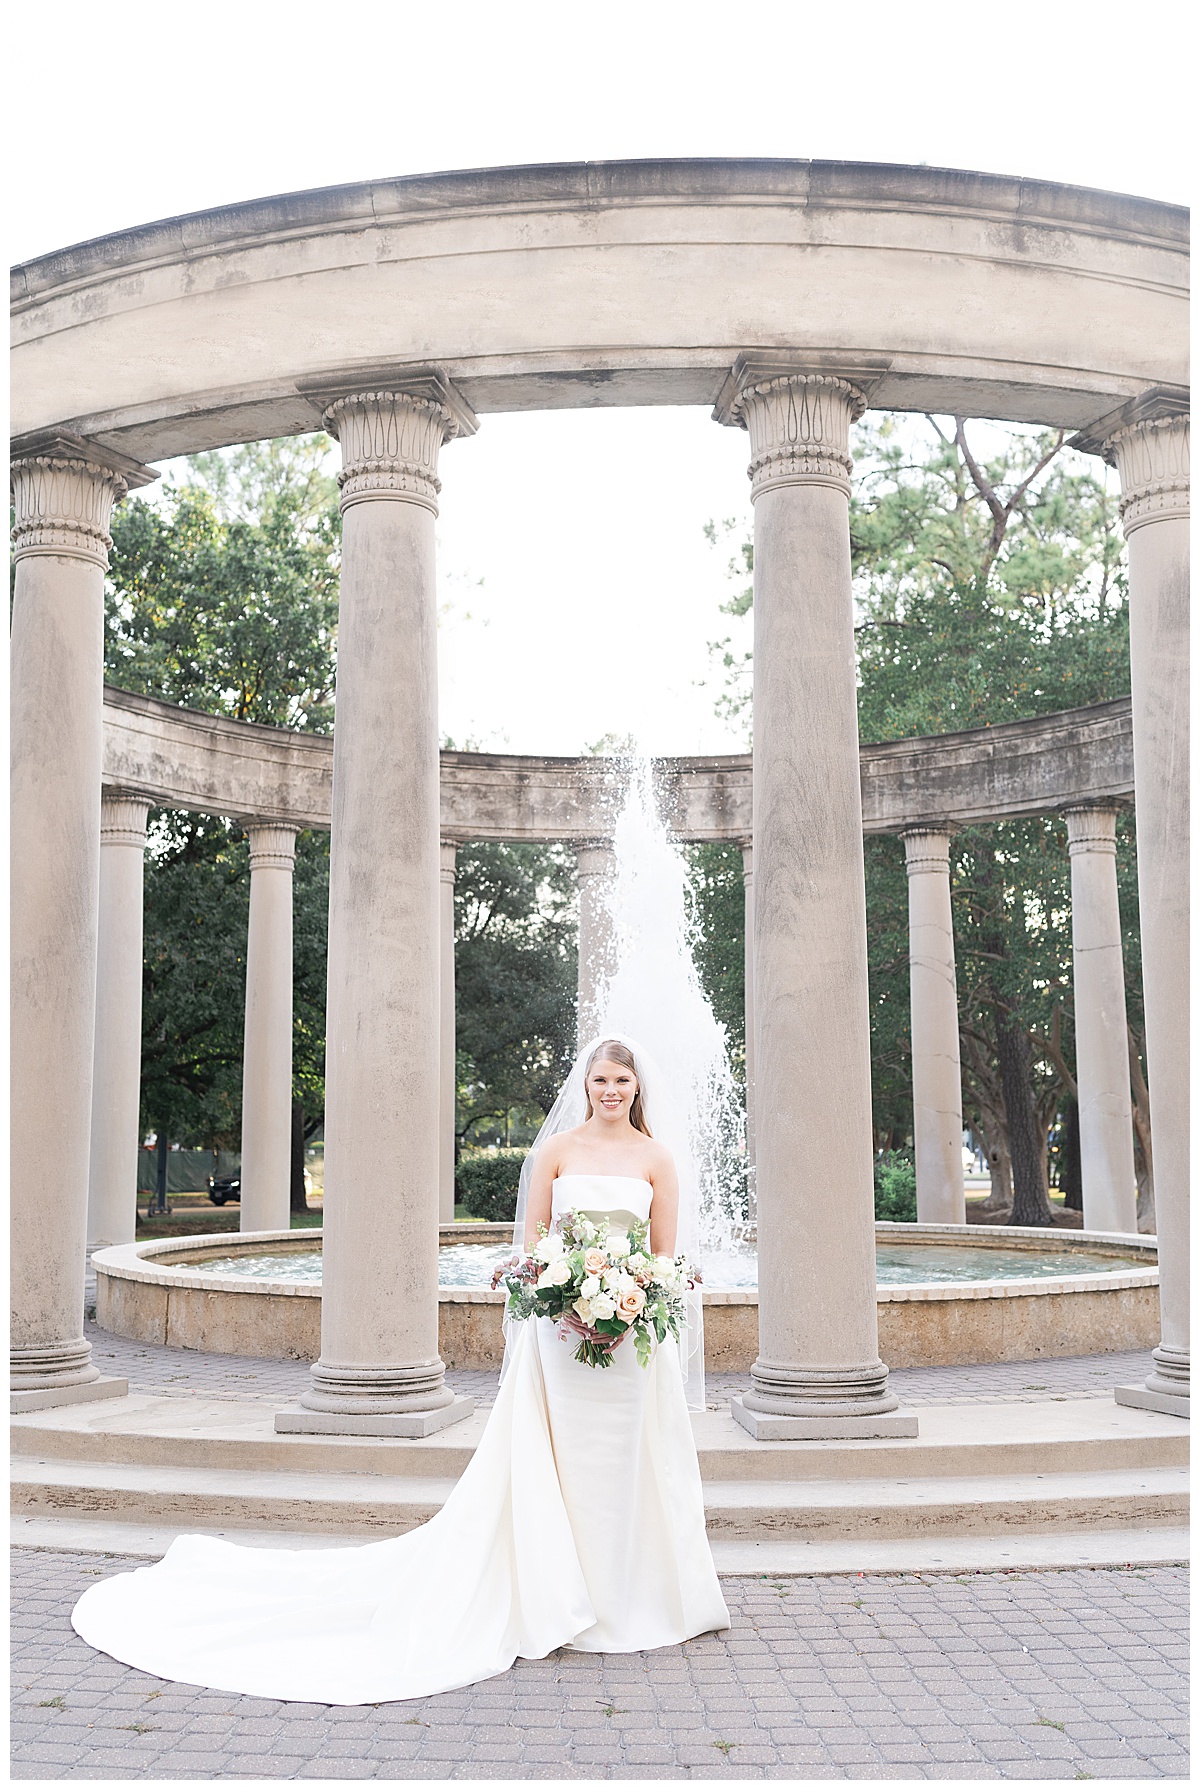 Woman stands in front of fountain after Stunning Bridal Portraits at The Creative Chateau